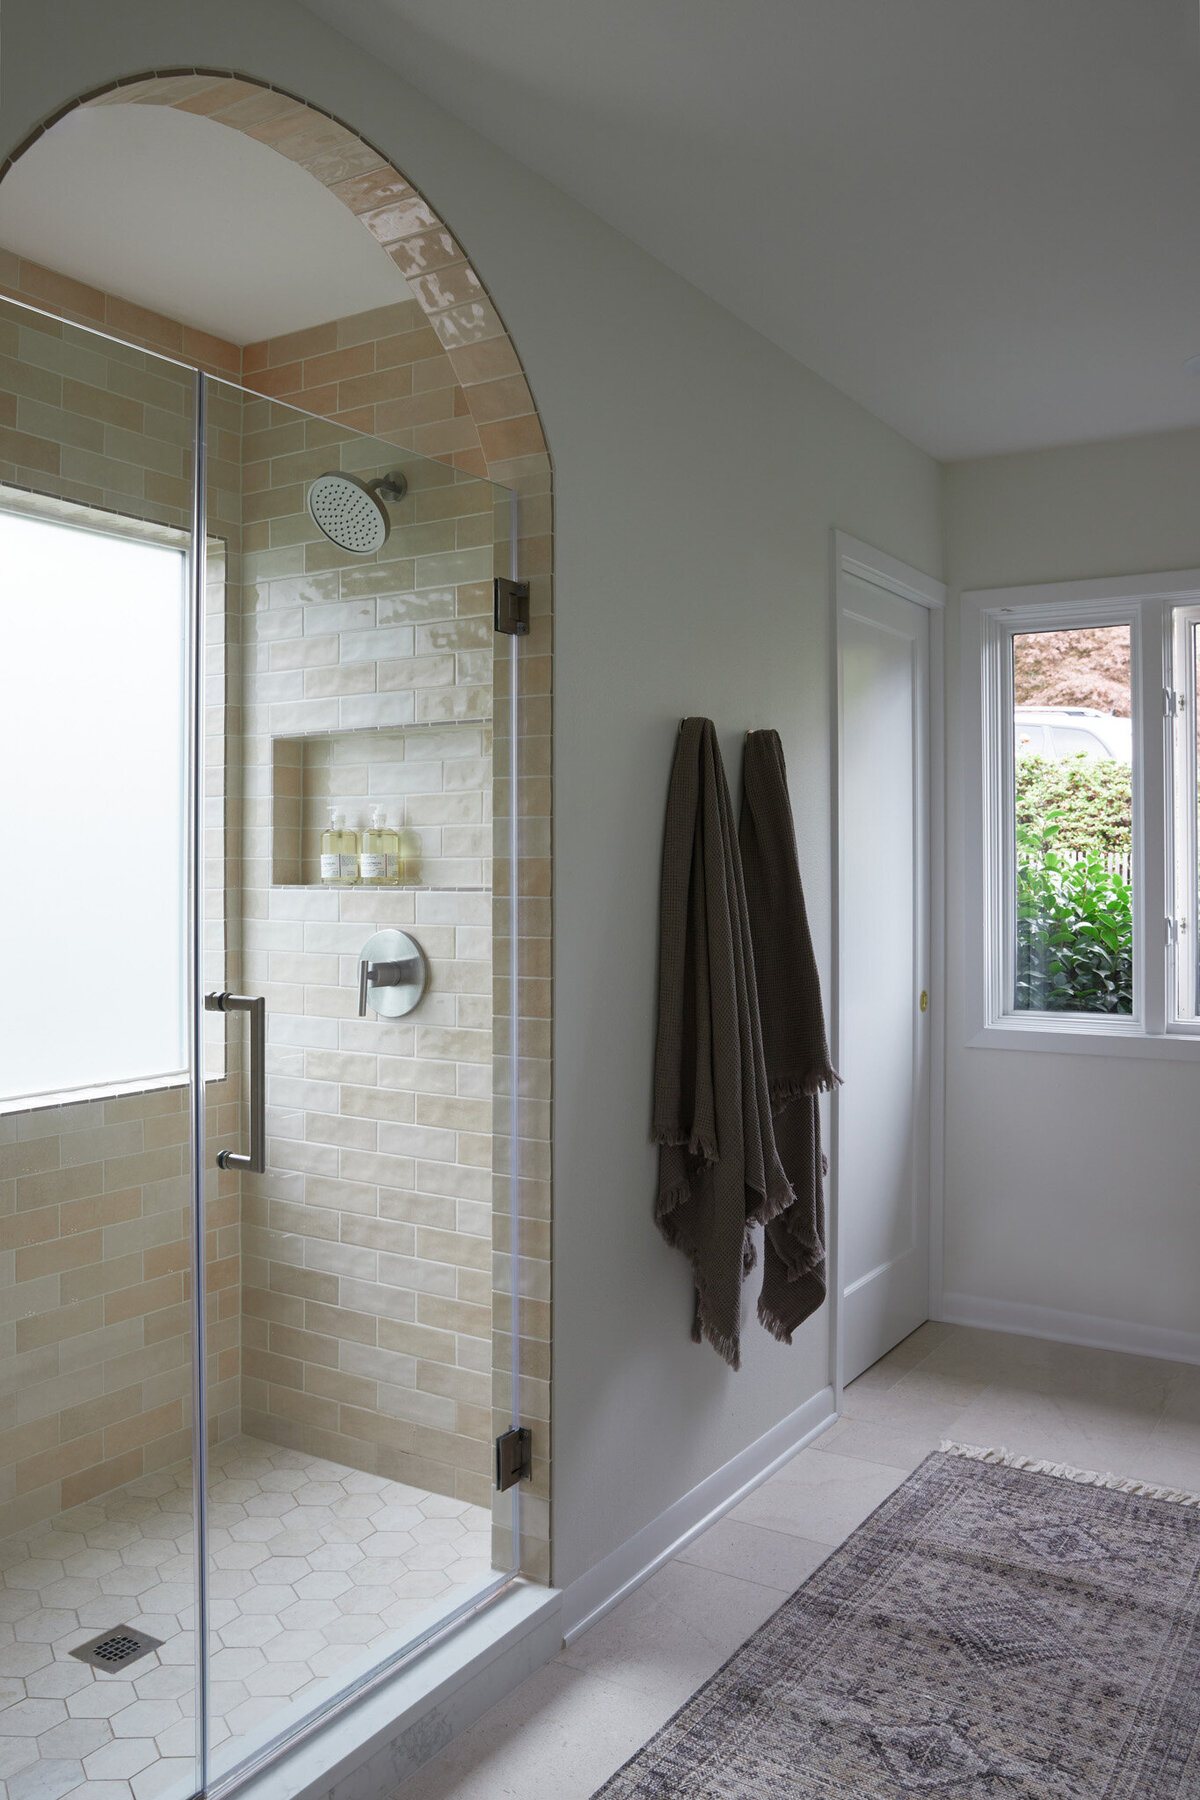 Bathroom with a shower with an arched entry and glass door. The shower has silver fixtures and a shampoo niche. The tile is brick set subway tile that’s beige and salmon in tone. To the right of the shower are two towels hooks with brown towels draped on them. A window in the right corner.